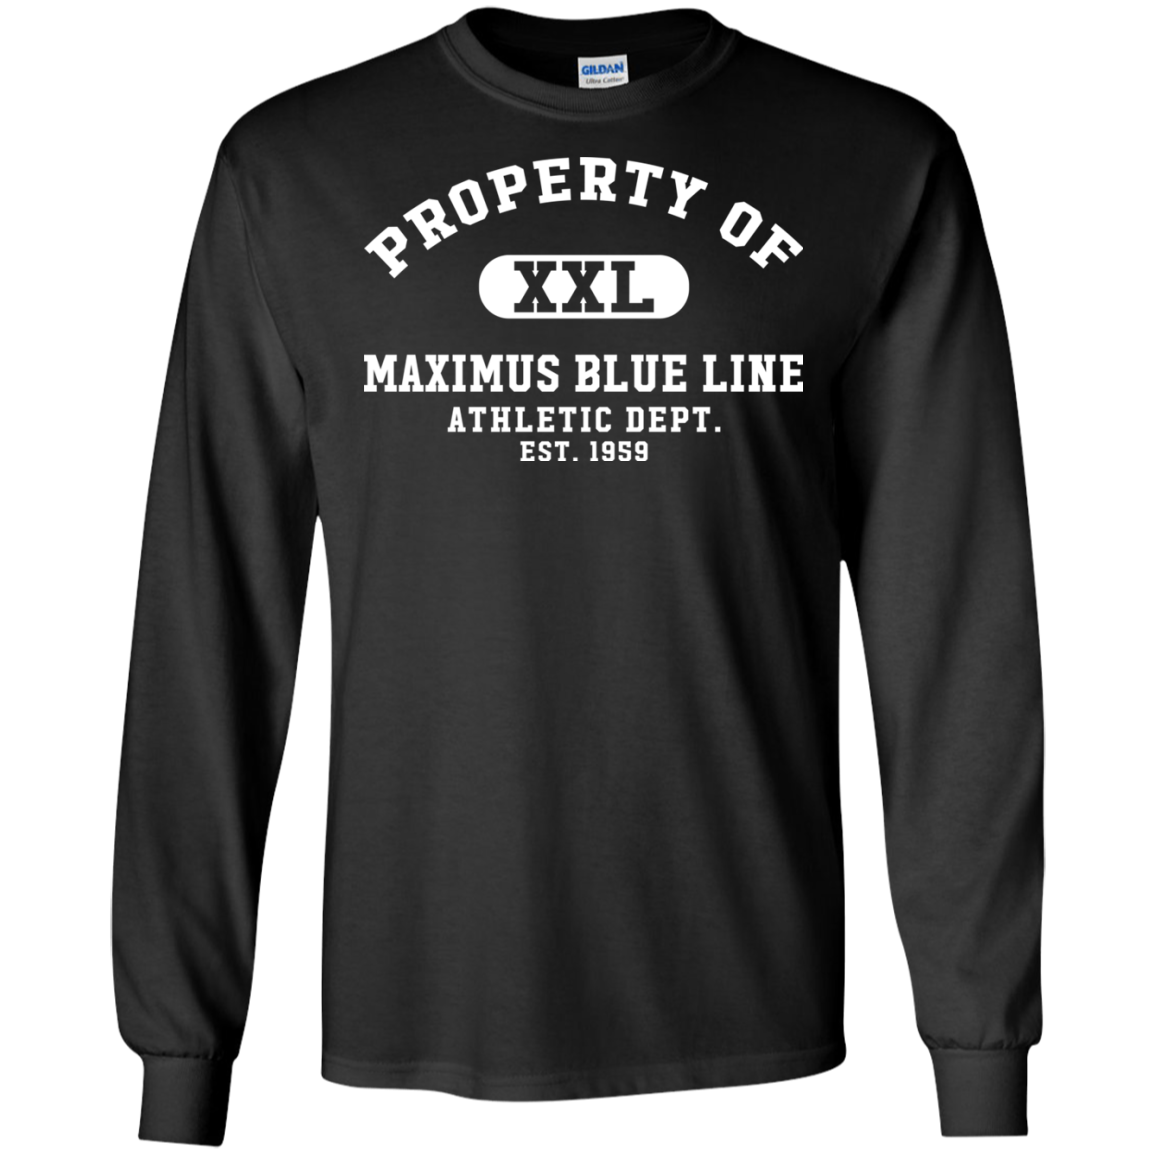 Rule #1 is our priority. Everybody goes home. – Maximus Blue Line